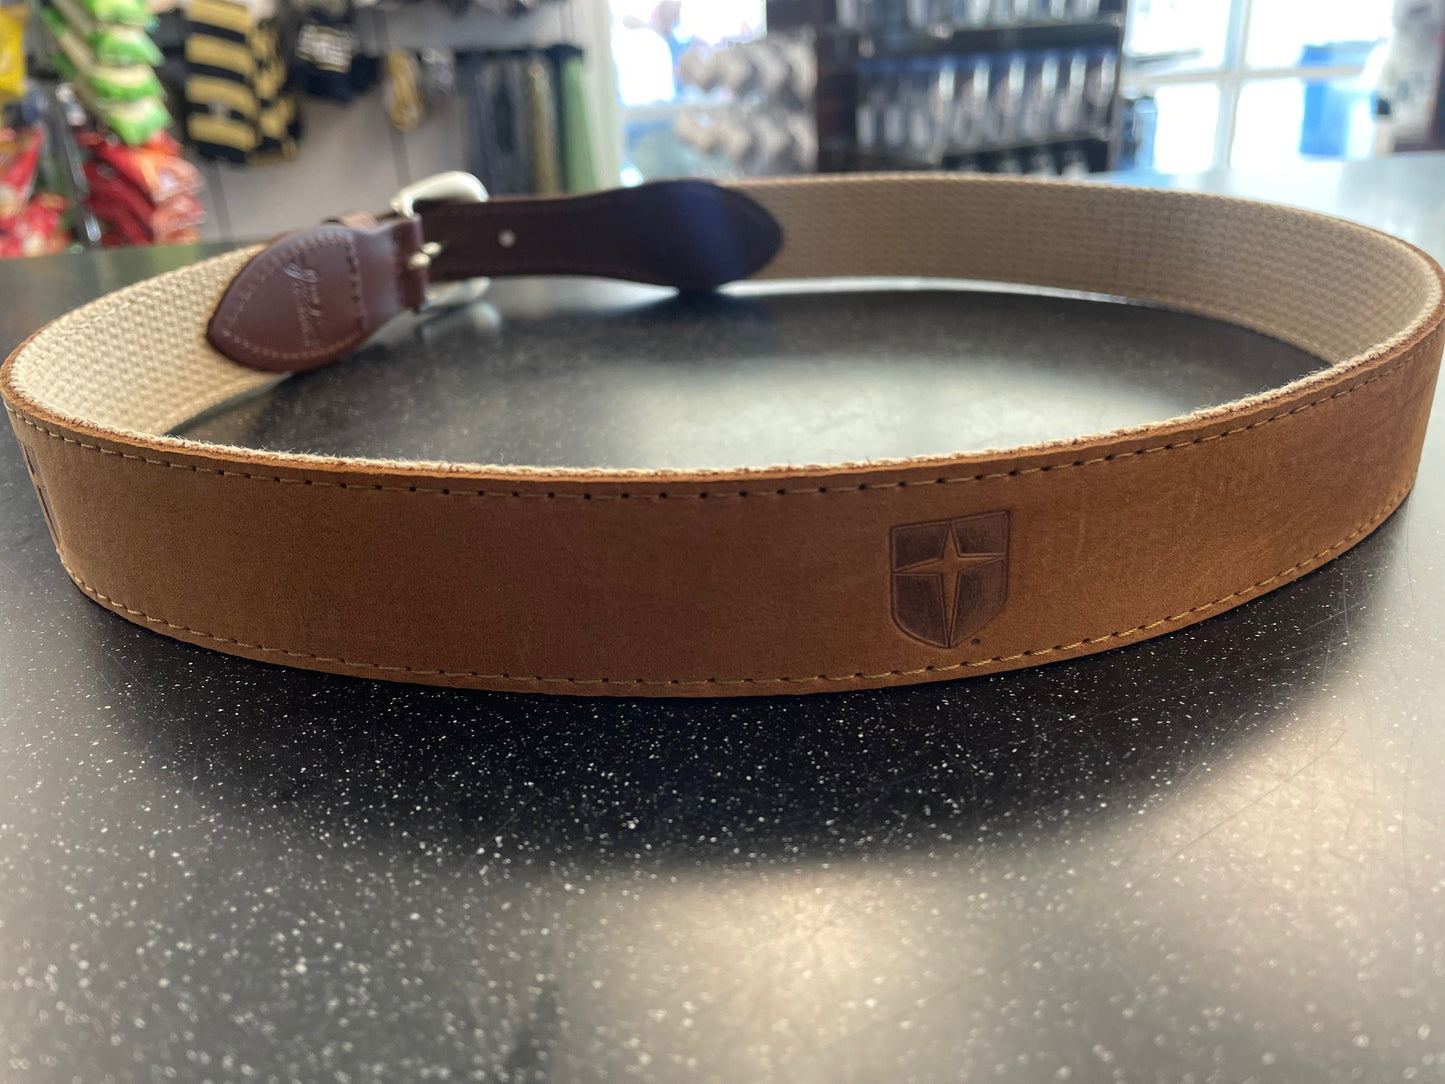 Nubuck Suede Leather Belt Embossed with Shield